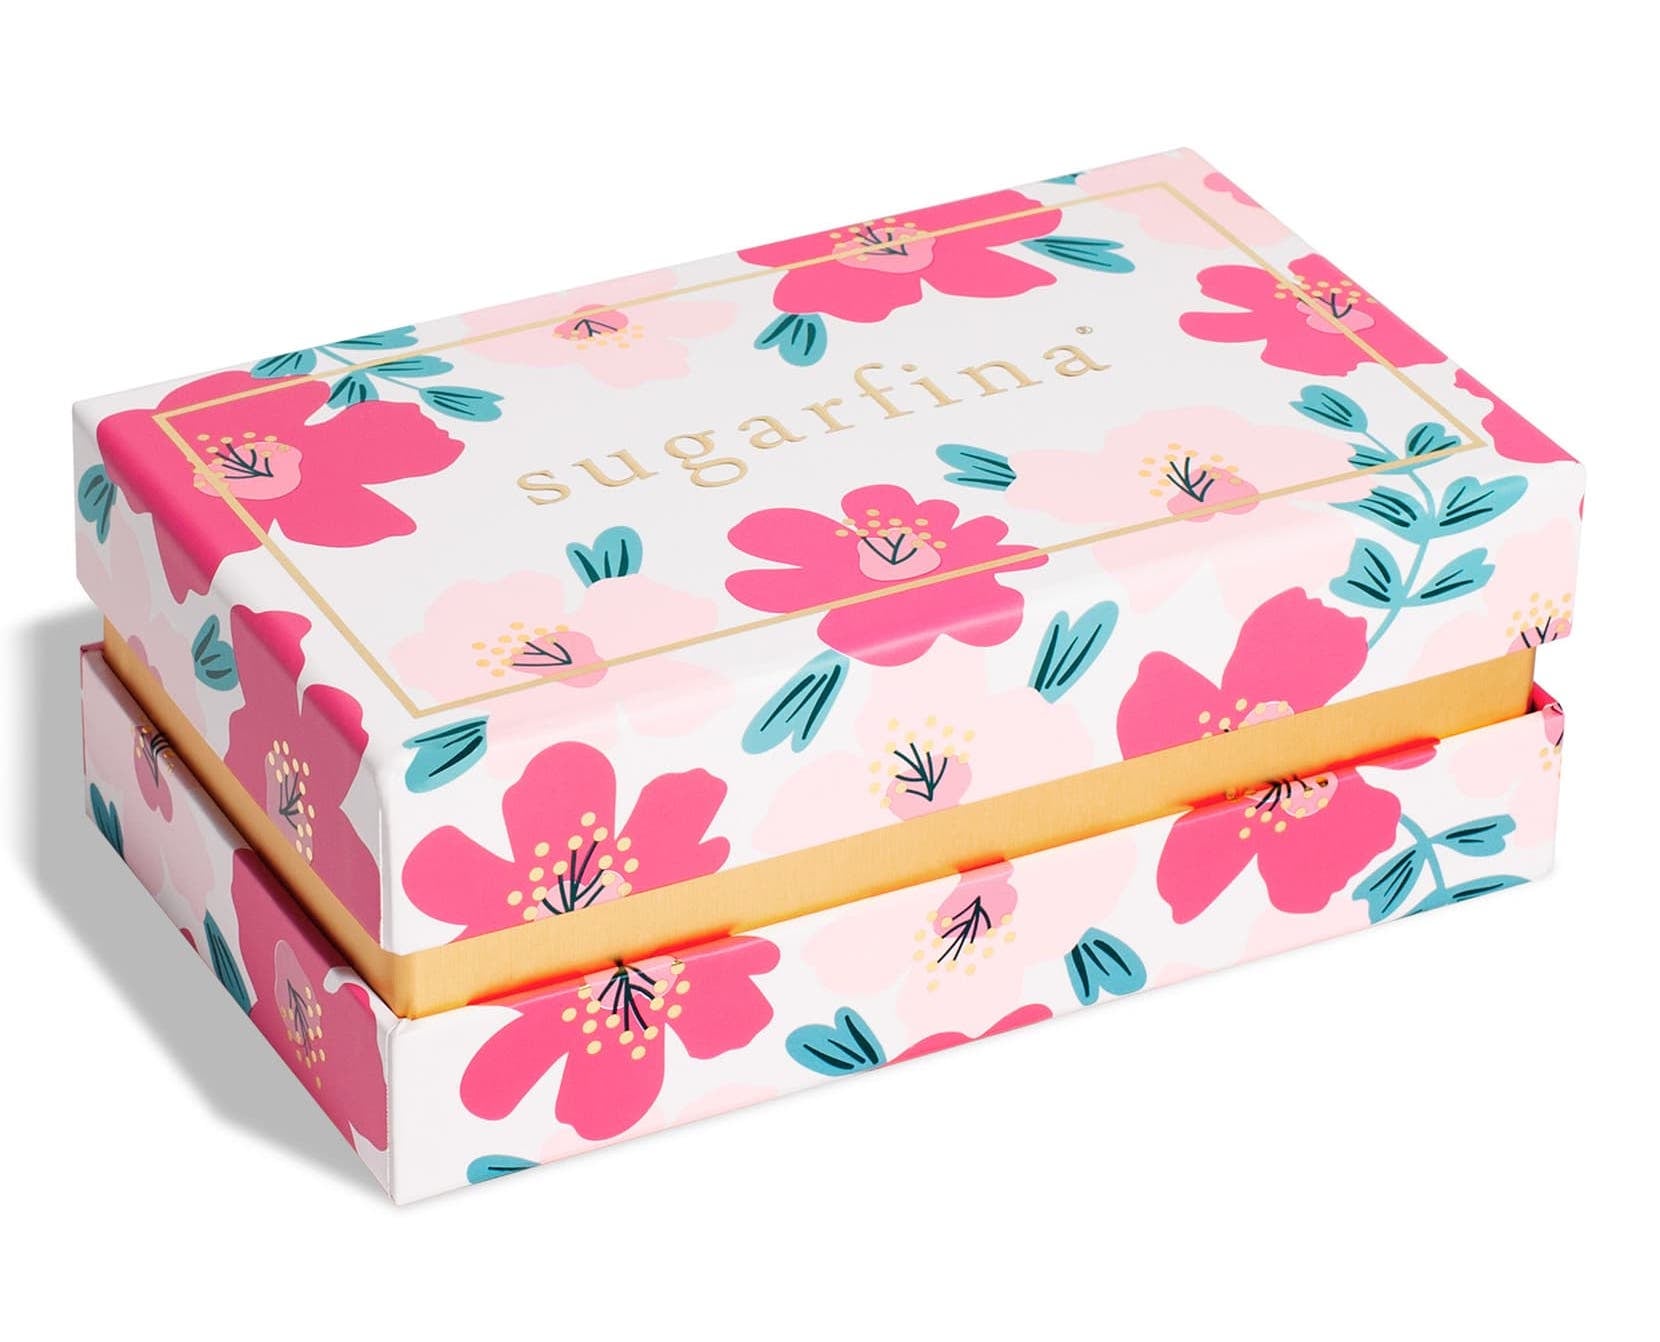 2 piece candy boxes